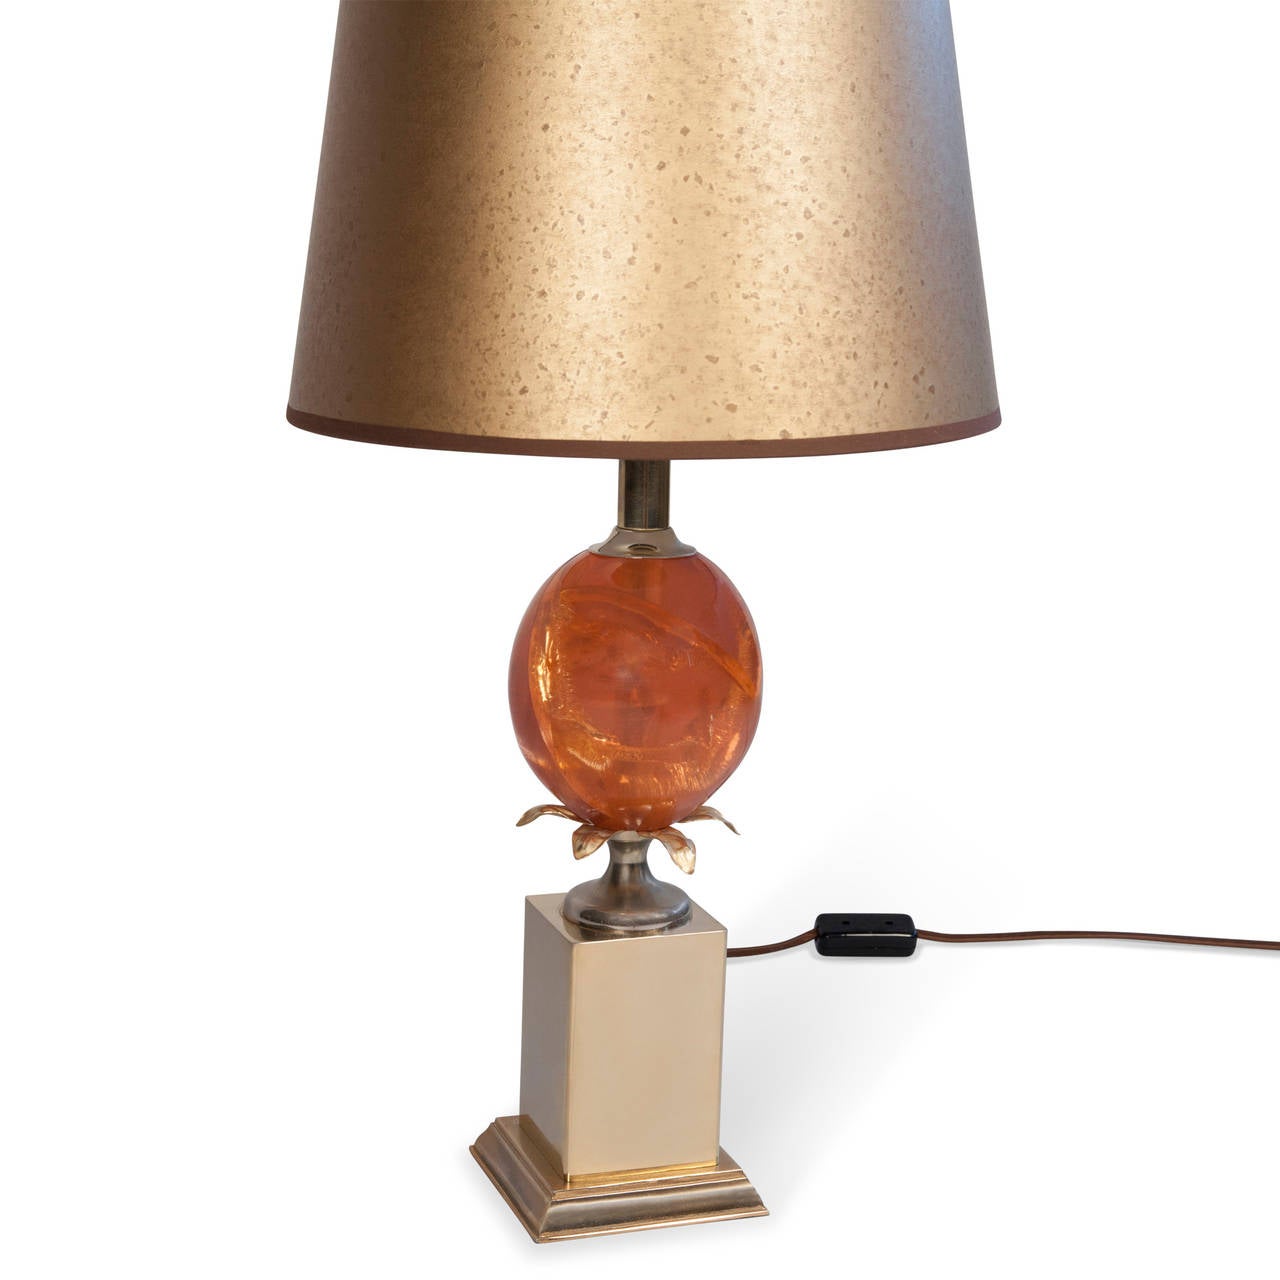 Single fractured resin table lamp, the orange resin in an ovoid shape, resting on a square brass base, French early 1970s. In custom mottled gold paper shade. Overall height 25 1/2 in. Base measures 5 in square. Shade measures top diameter 10 in,